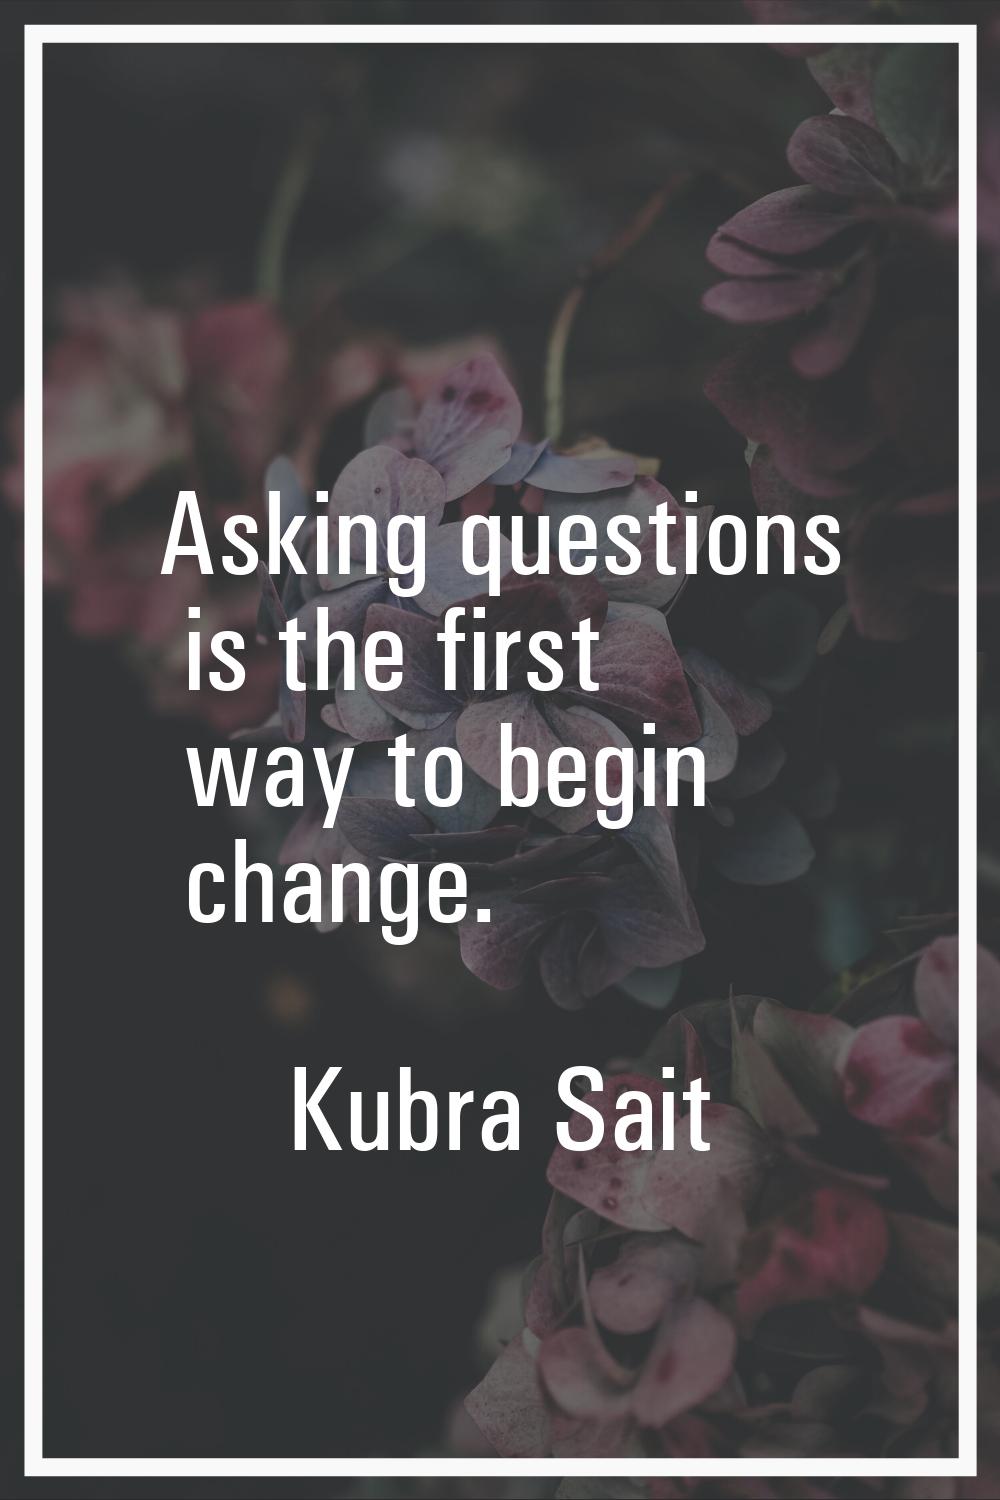 Asking questions is the first way to begin change.